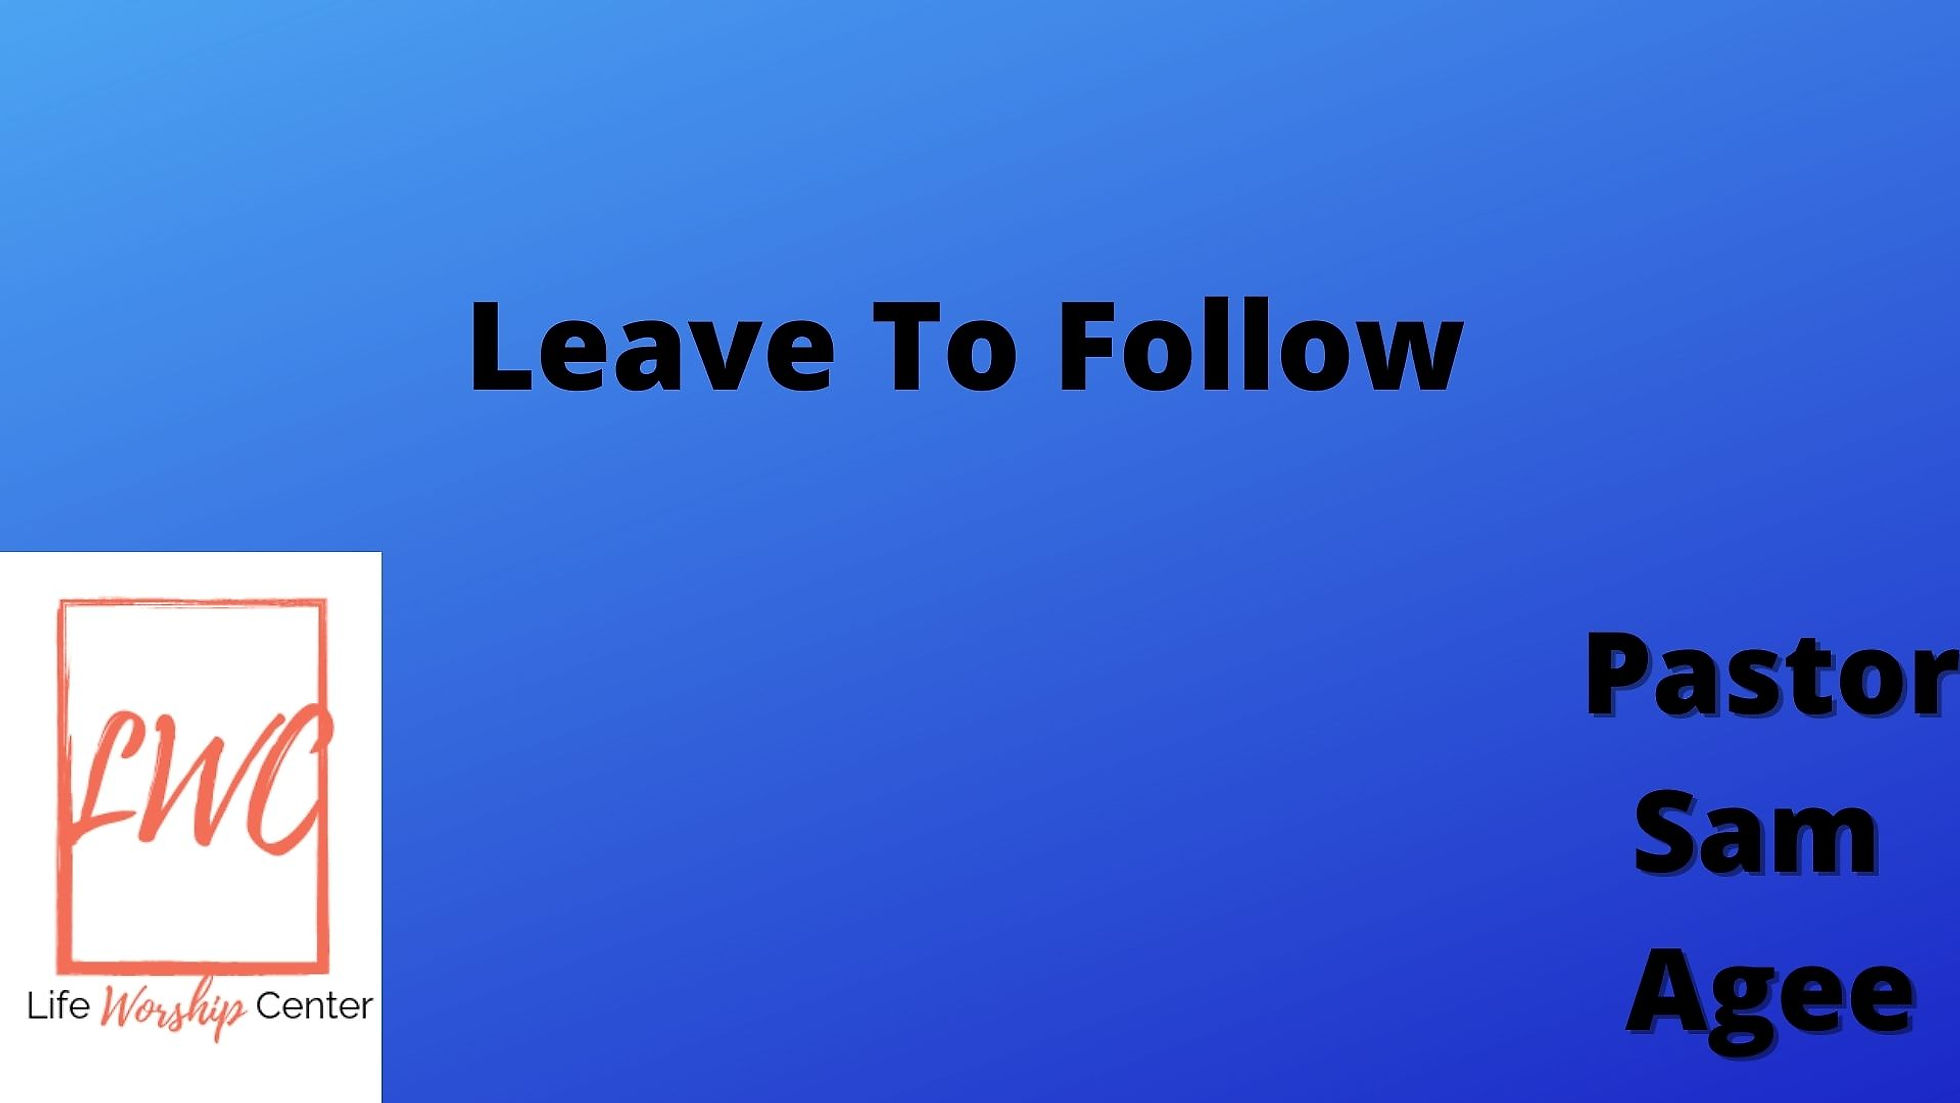 Leave To Follow (We Value Following Jesus)